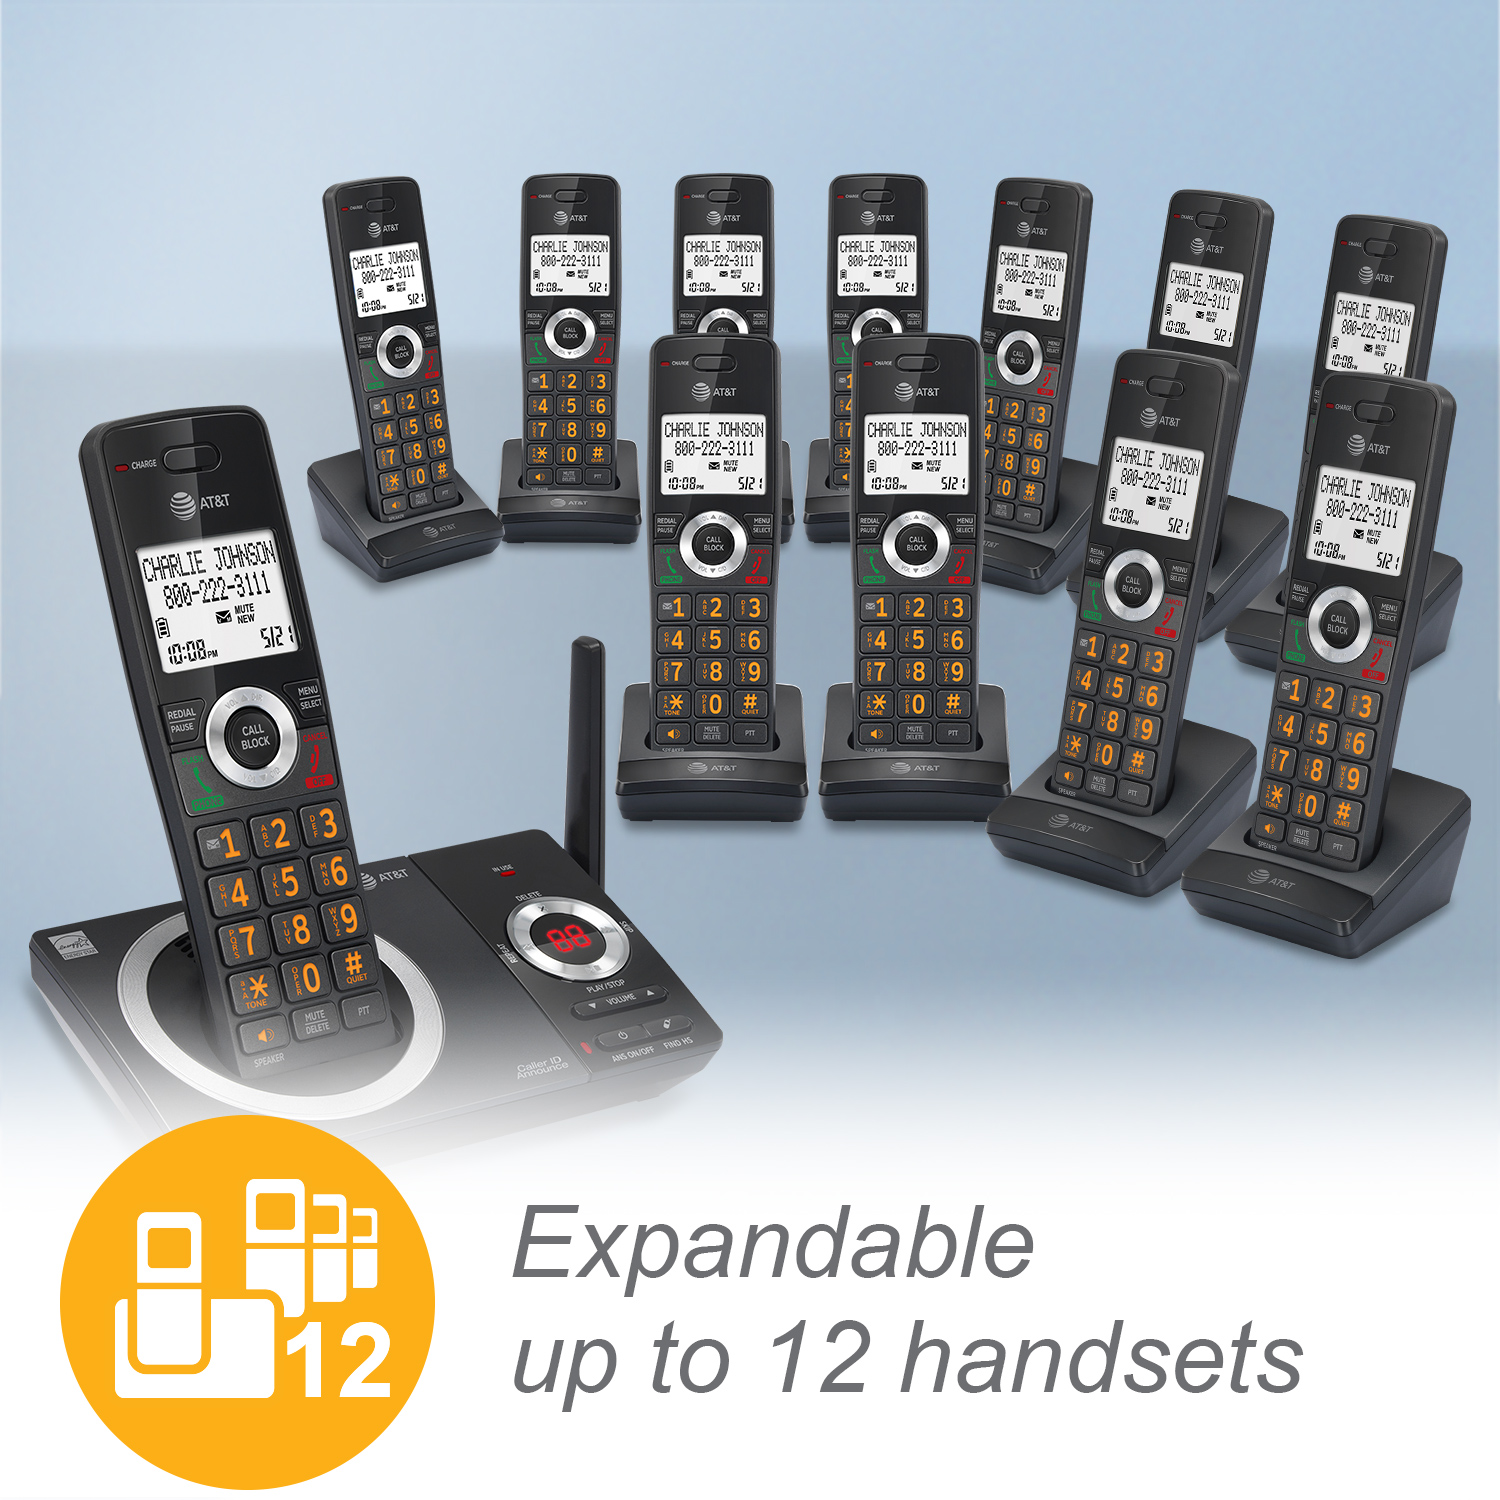 5-Handset Expandable Cordless Phone with Unsurpassed Range, Smart Call Blocker and Answering System - view 5